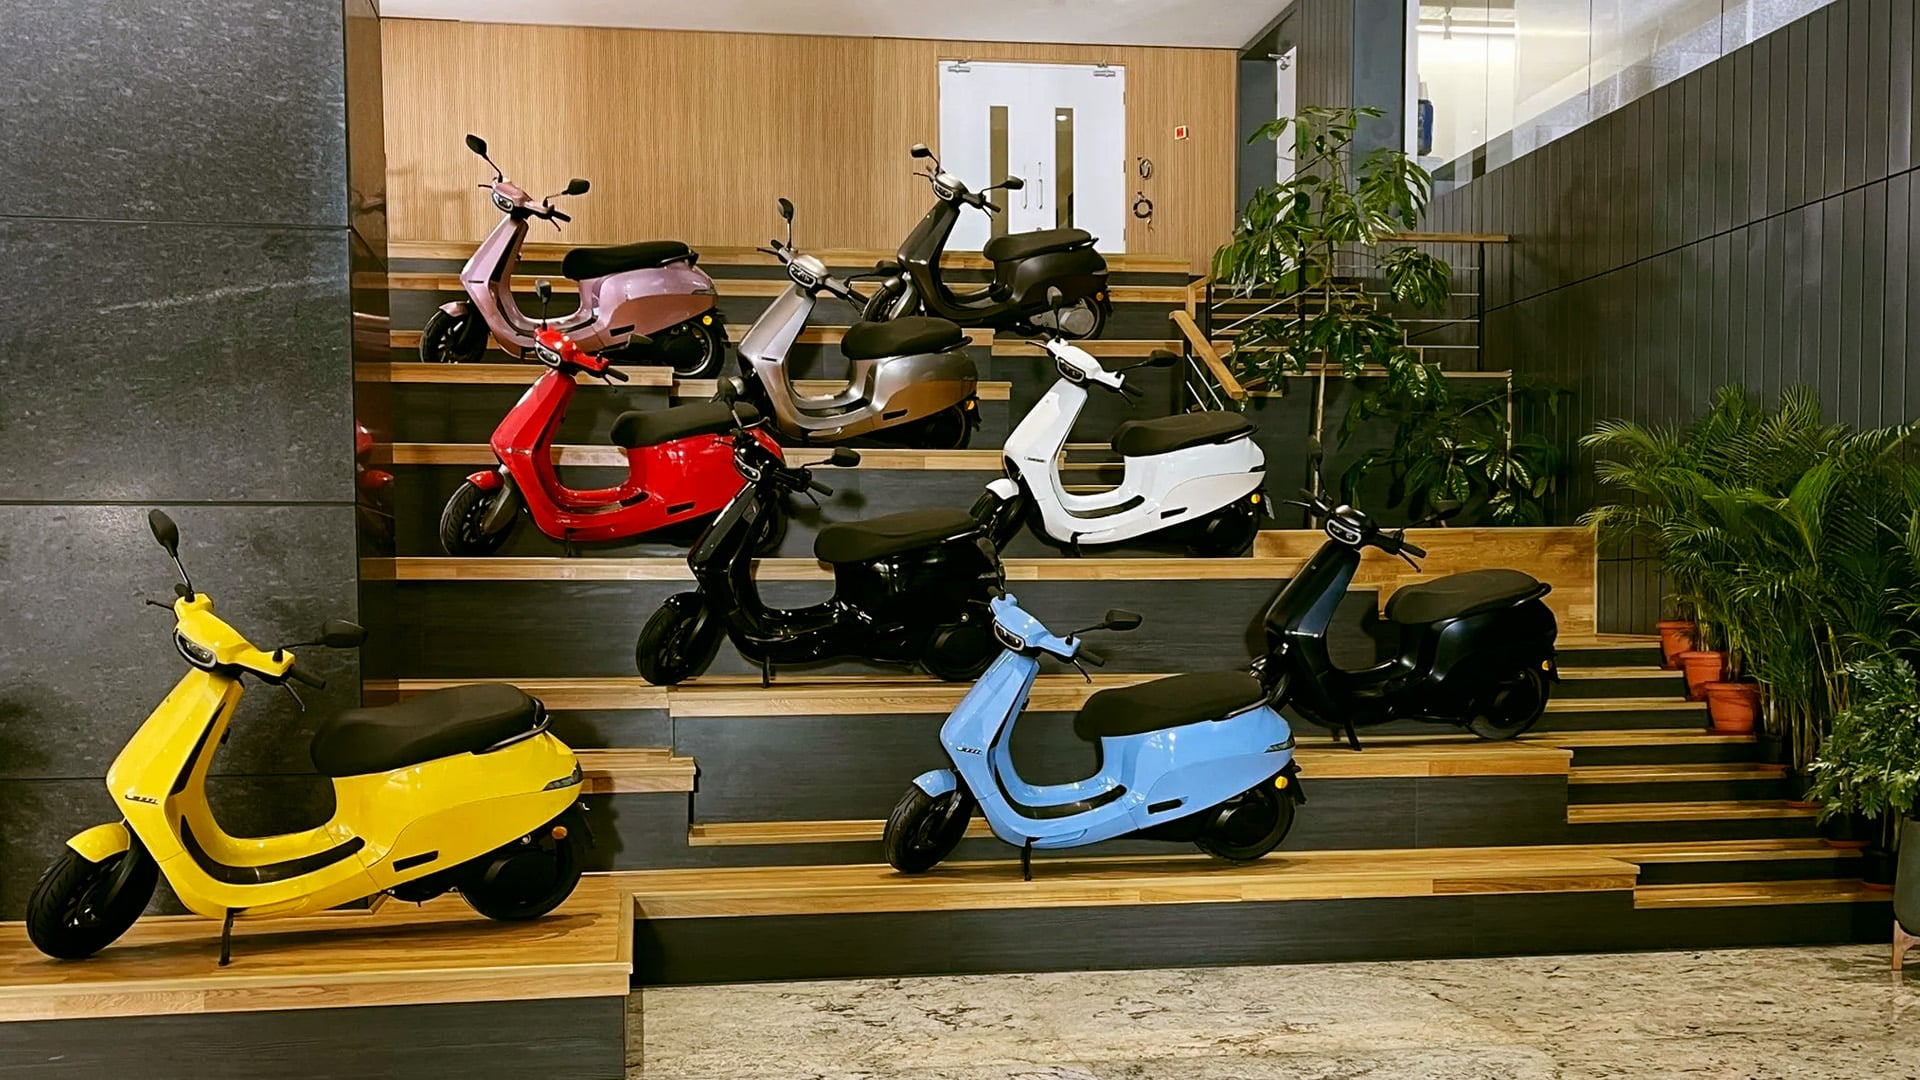 Sold electric scooters worth over Rs 600 cr in a day: Ola co-founder